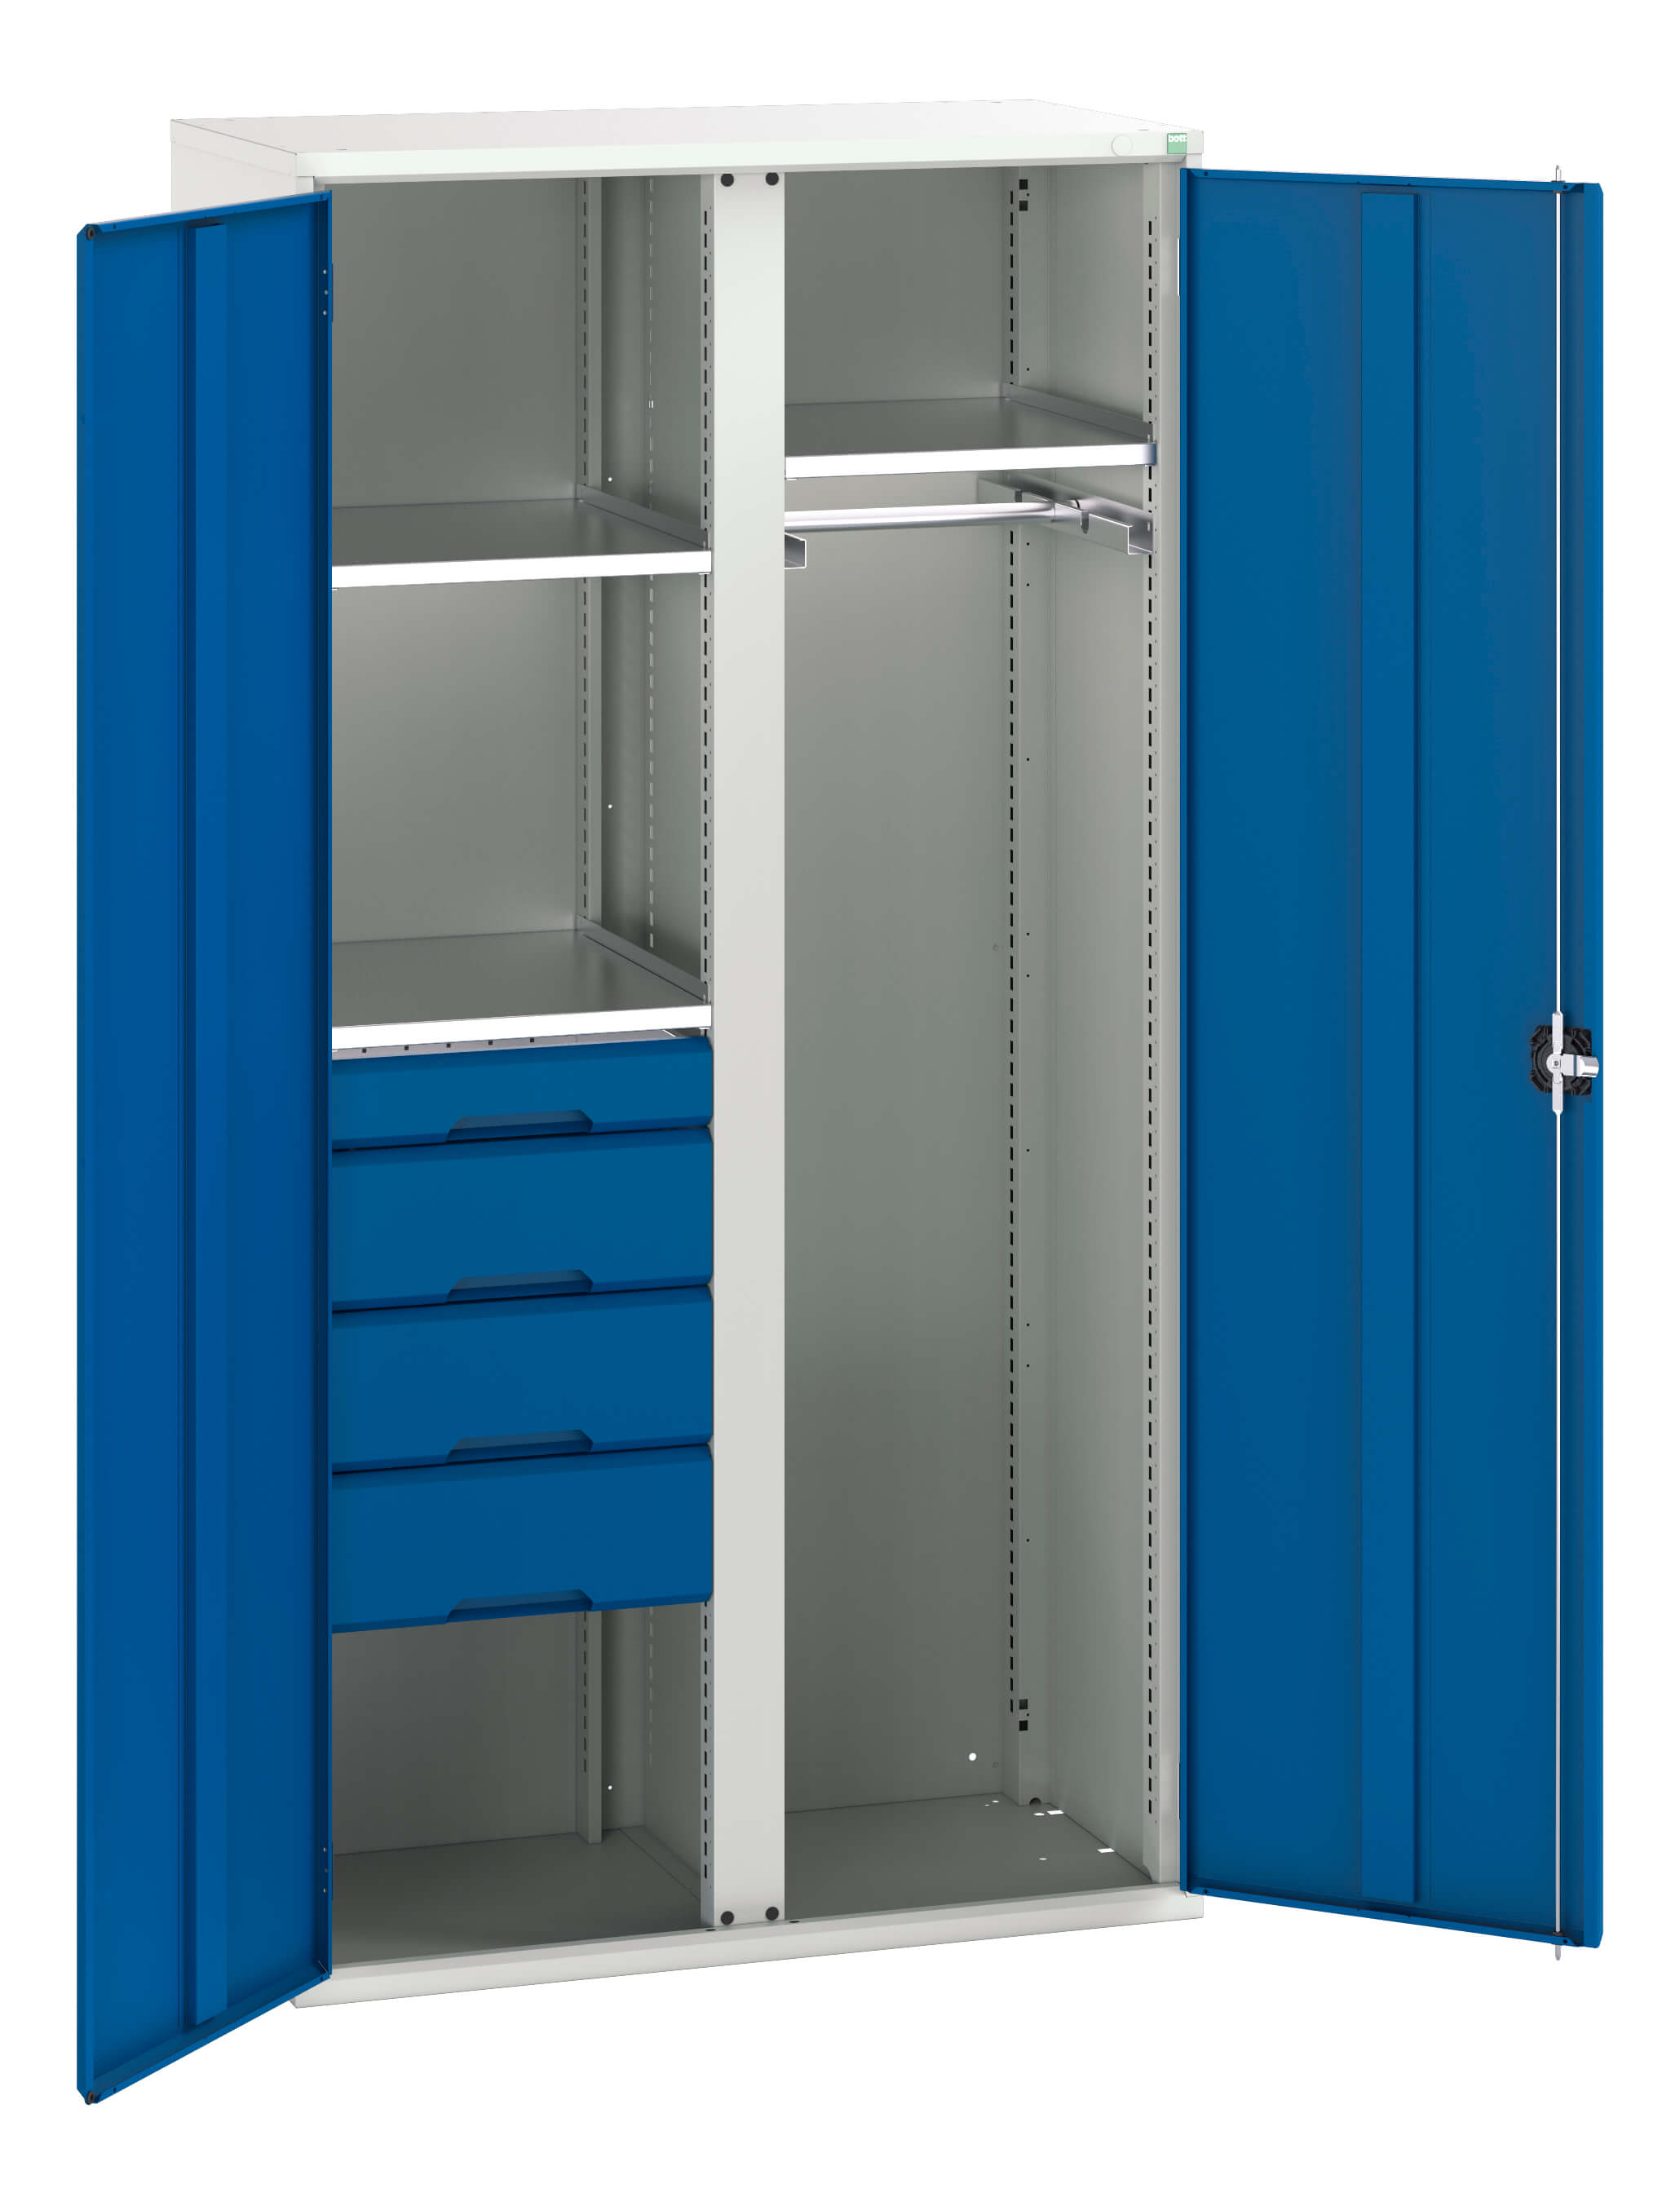 Bott Verso Ppe / Janitorial Kitted Cupboard With Vertical Partition - 16926581.11